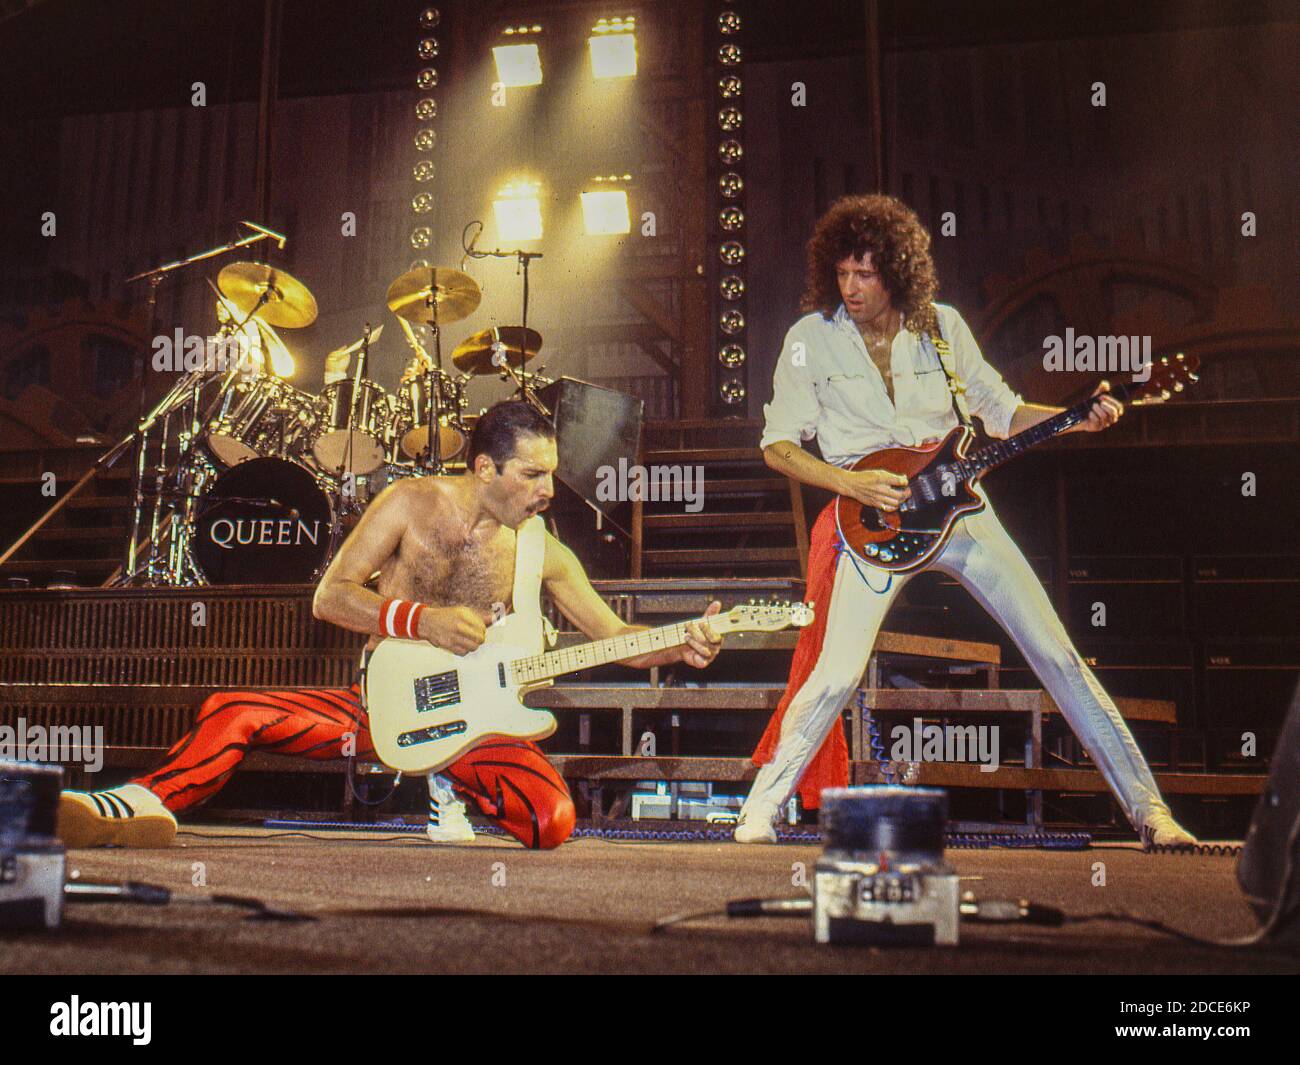 The British rock band Queen in concert at Wembley Arena,London 4.9.1984 Stock Photo